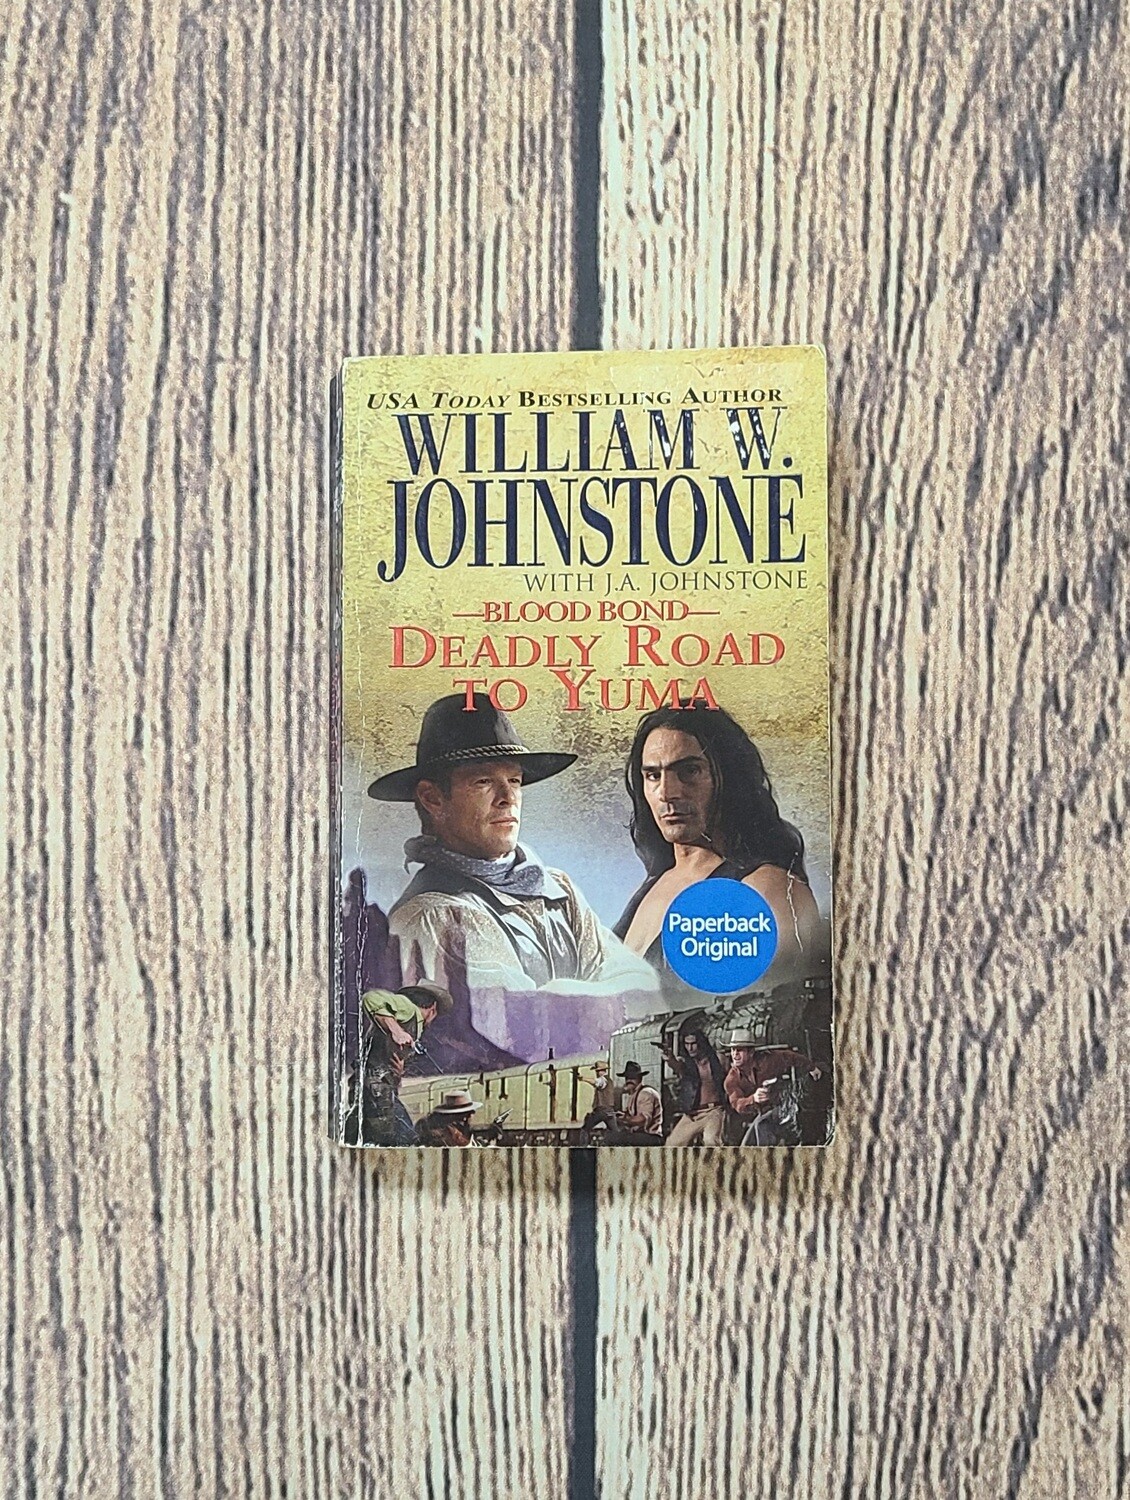 Blood Bond: Deadly Road To Yuma by WIlliam W. Johnstone with J.A. Johnstone